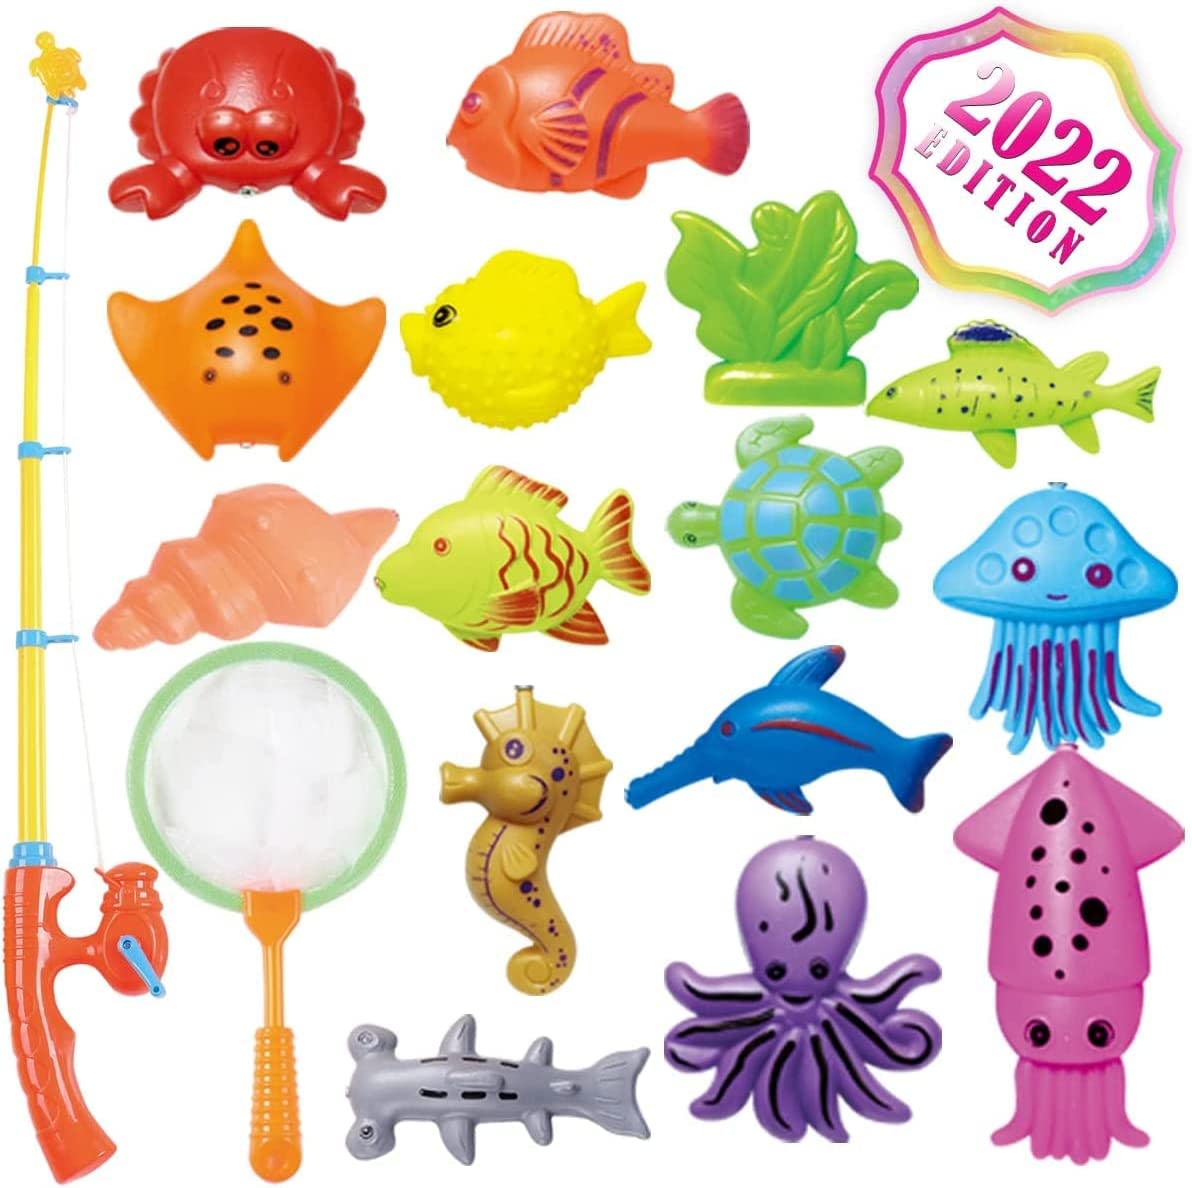 Kids Fishing Bath Toys Game - 17Pcs Magnetic Floating Toy Magnet Pole Rod Net, Plastic Floating Fish - Toddler Education Teaching and Learning Colors (New)